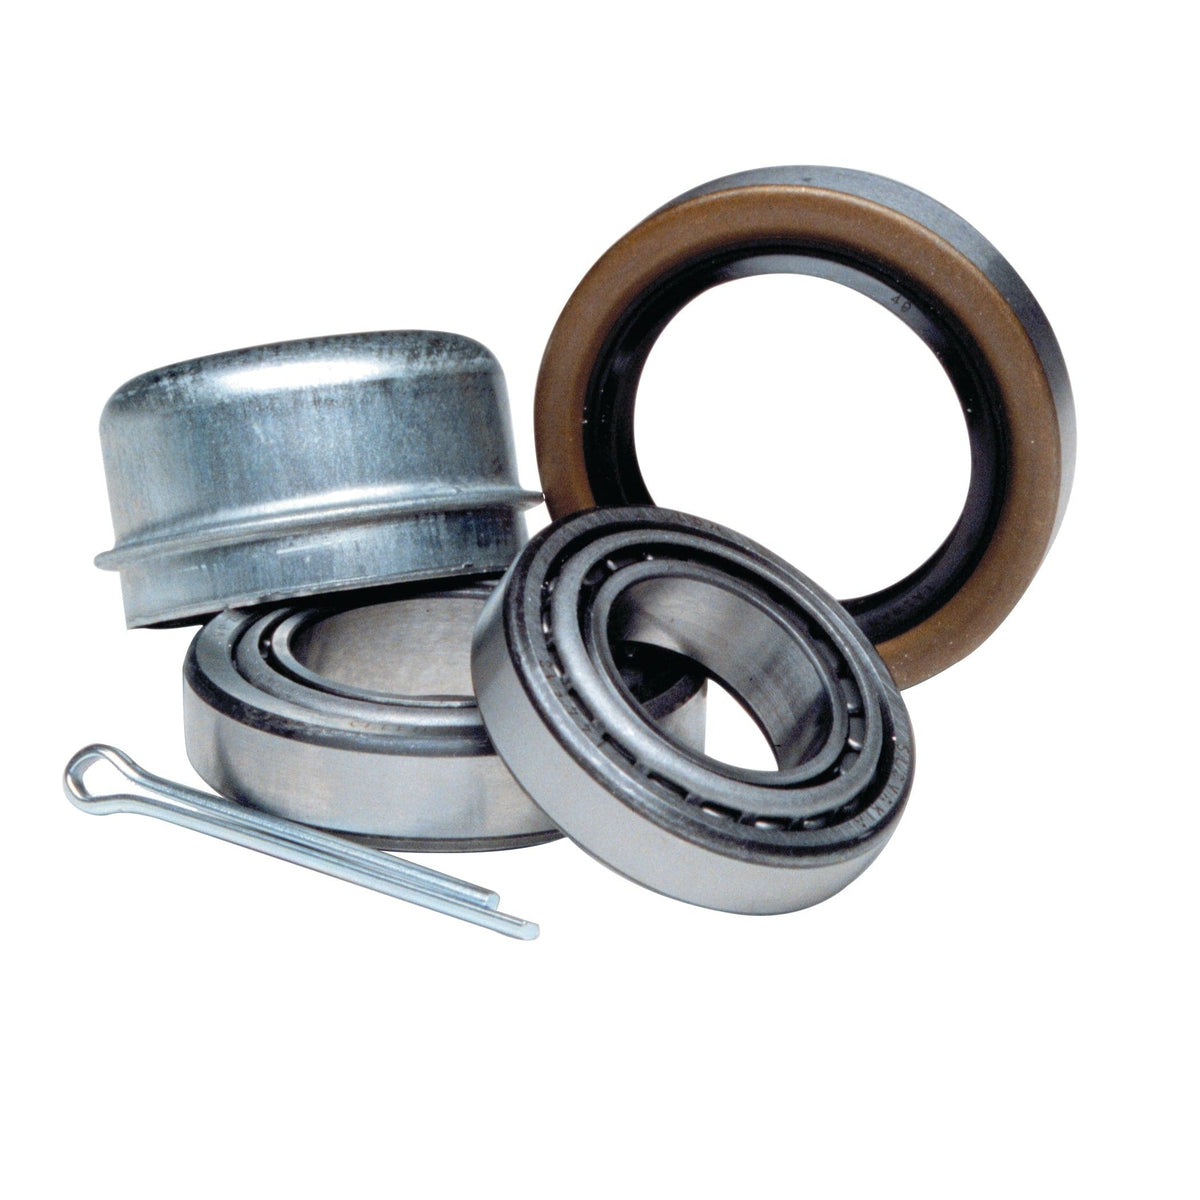 Tie Down Engineering Qualifies for Free Shipping Tie Down 3/4" Bearings with Dust Cap #81106